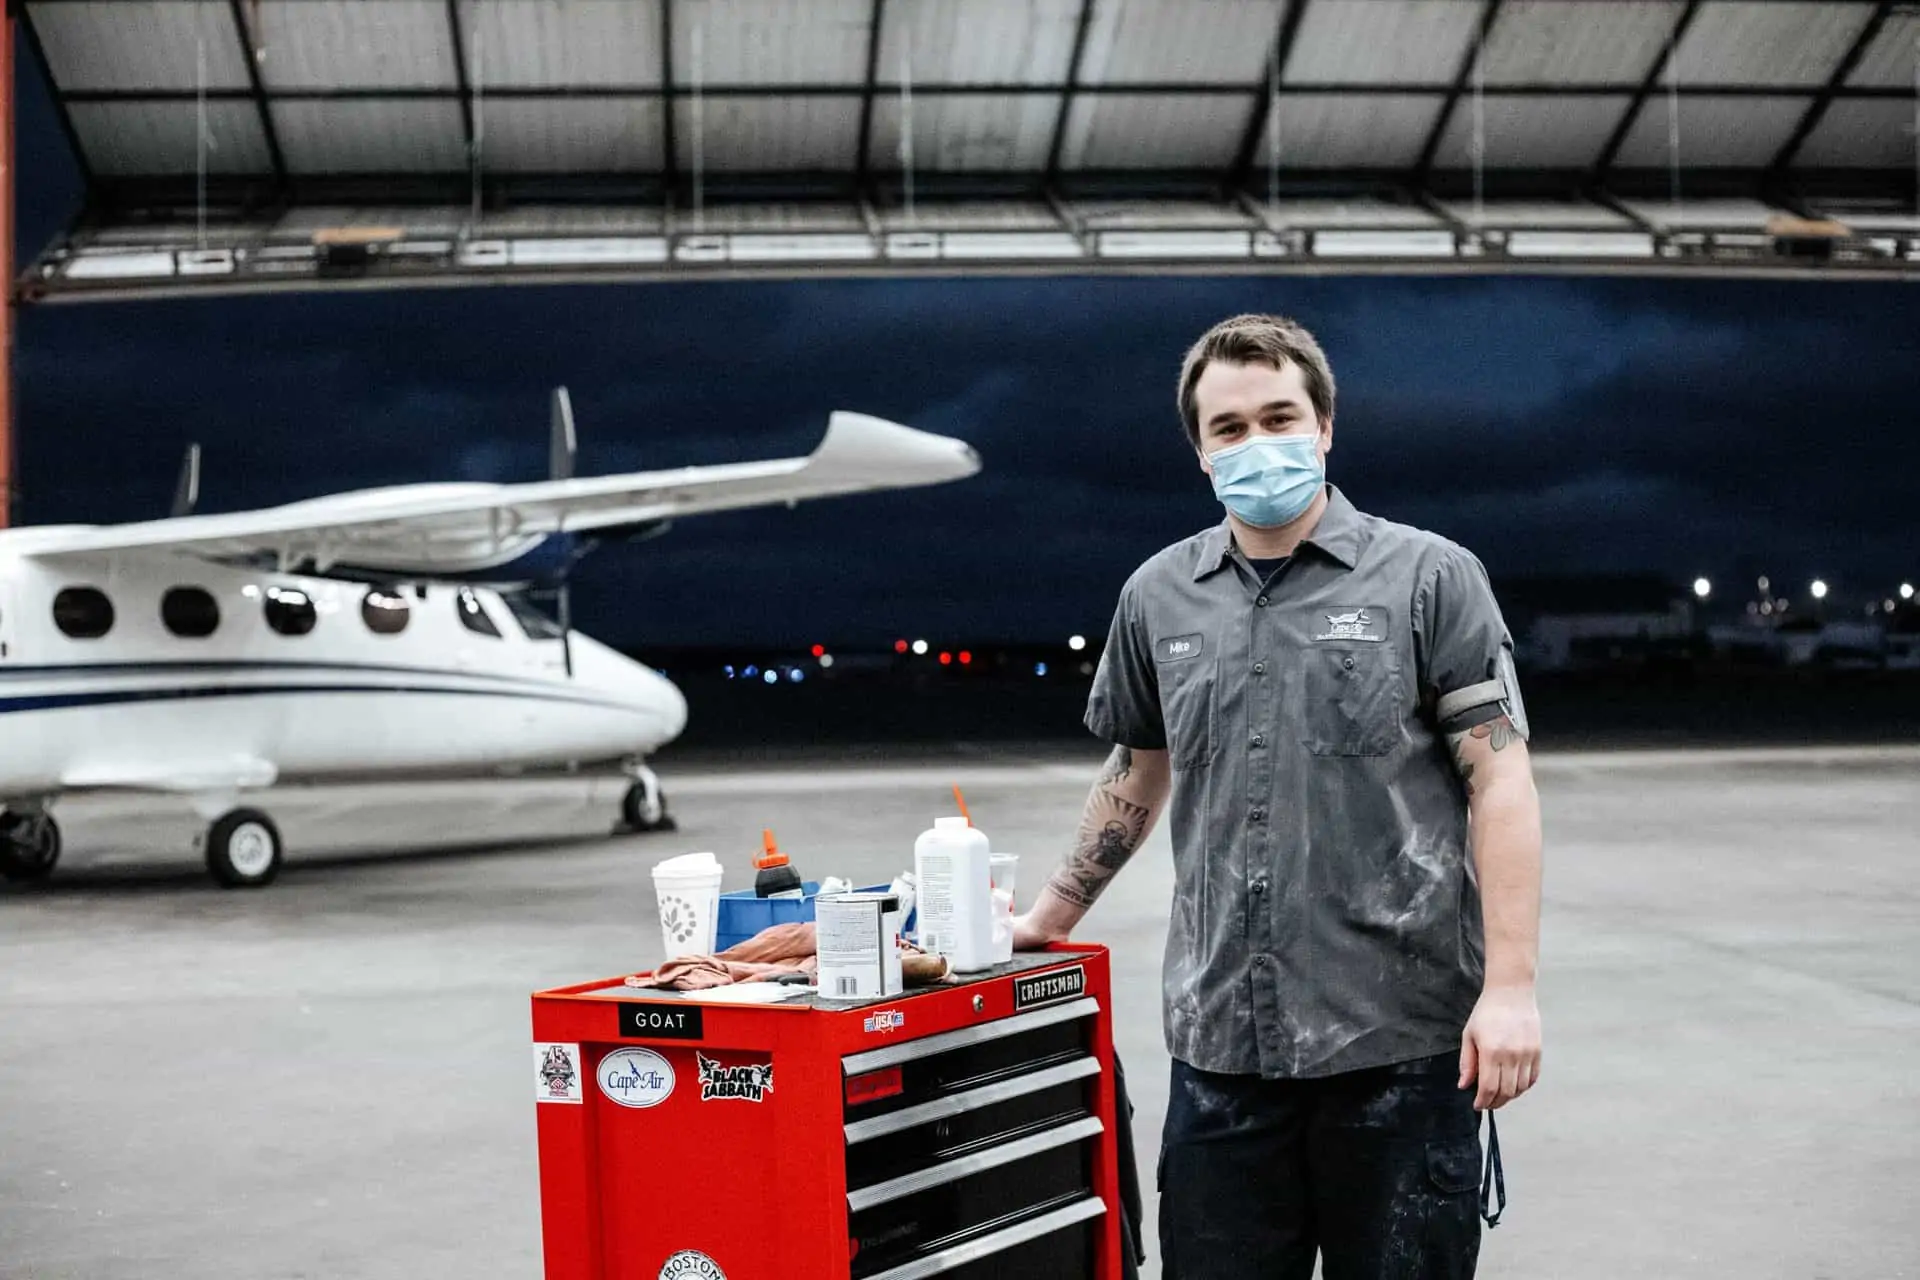 What does an aircraft mechanic do?